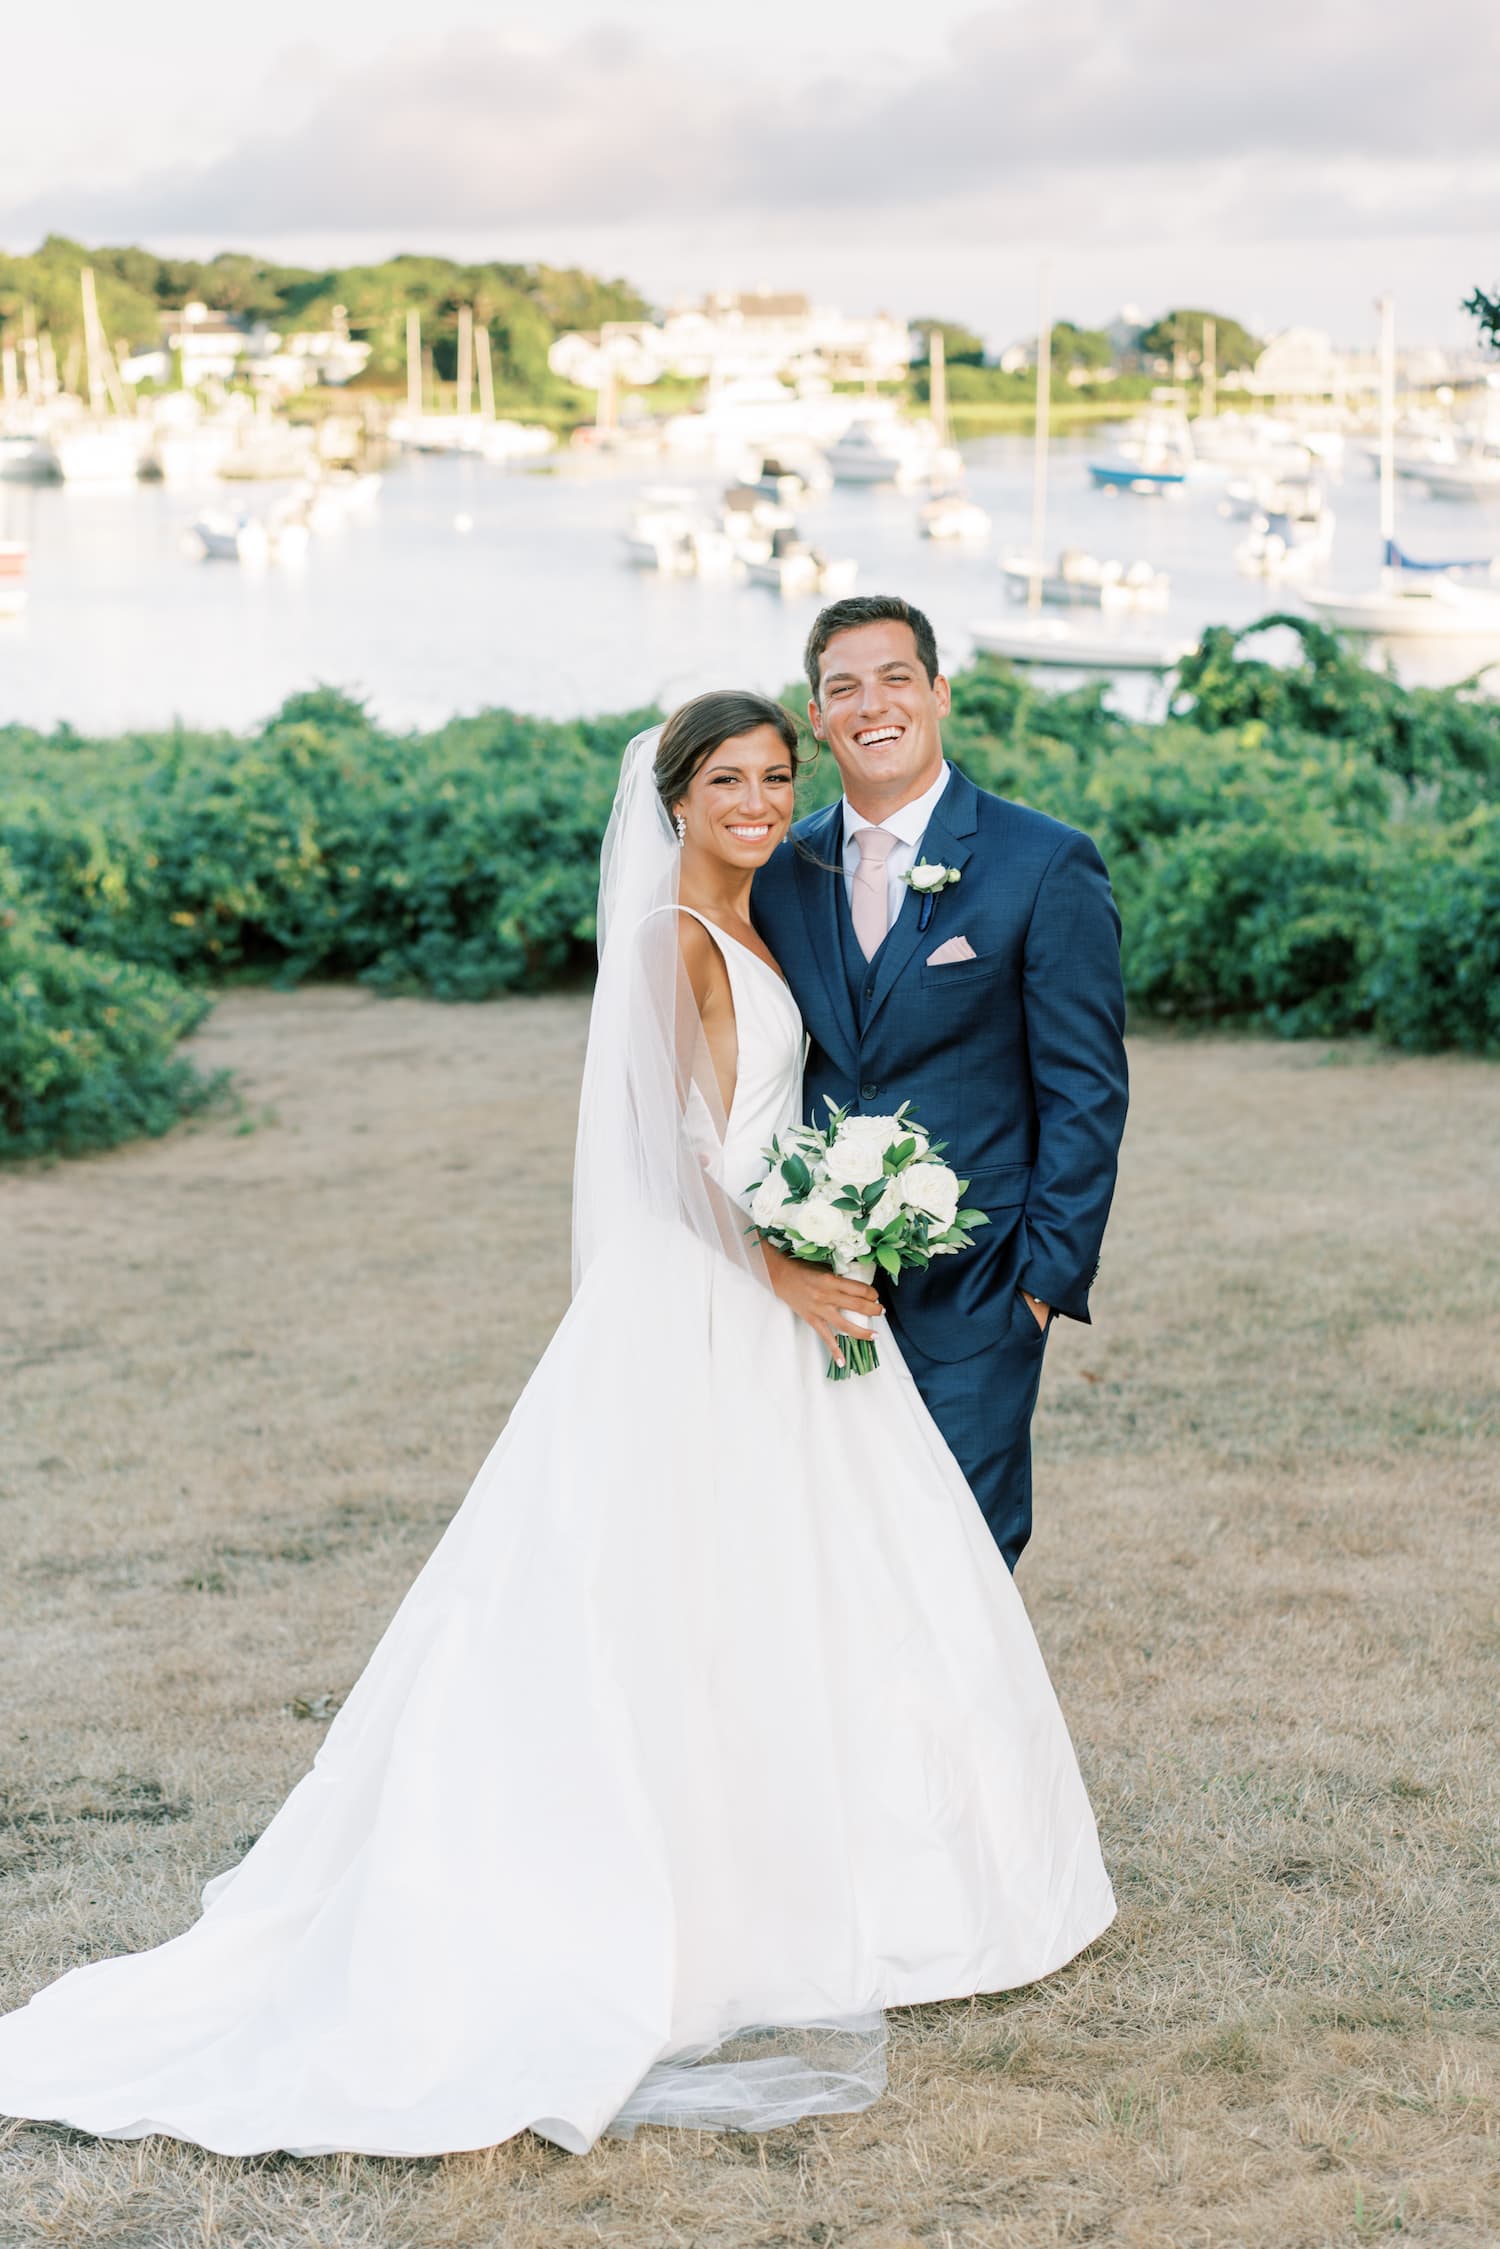 Bride and groom stand on the beach at their Cape Cod wedding venue, photographed by Marcela Plosker, a Boston wedding photographer.